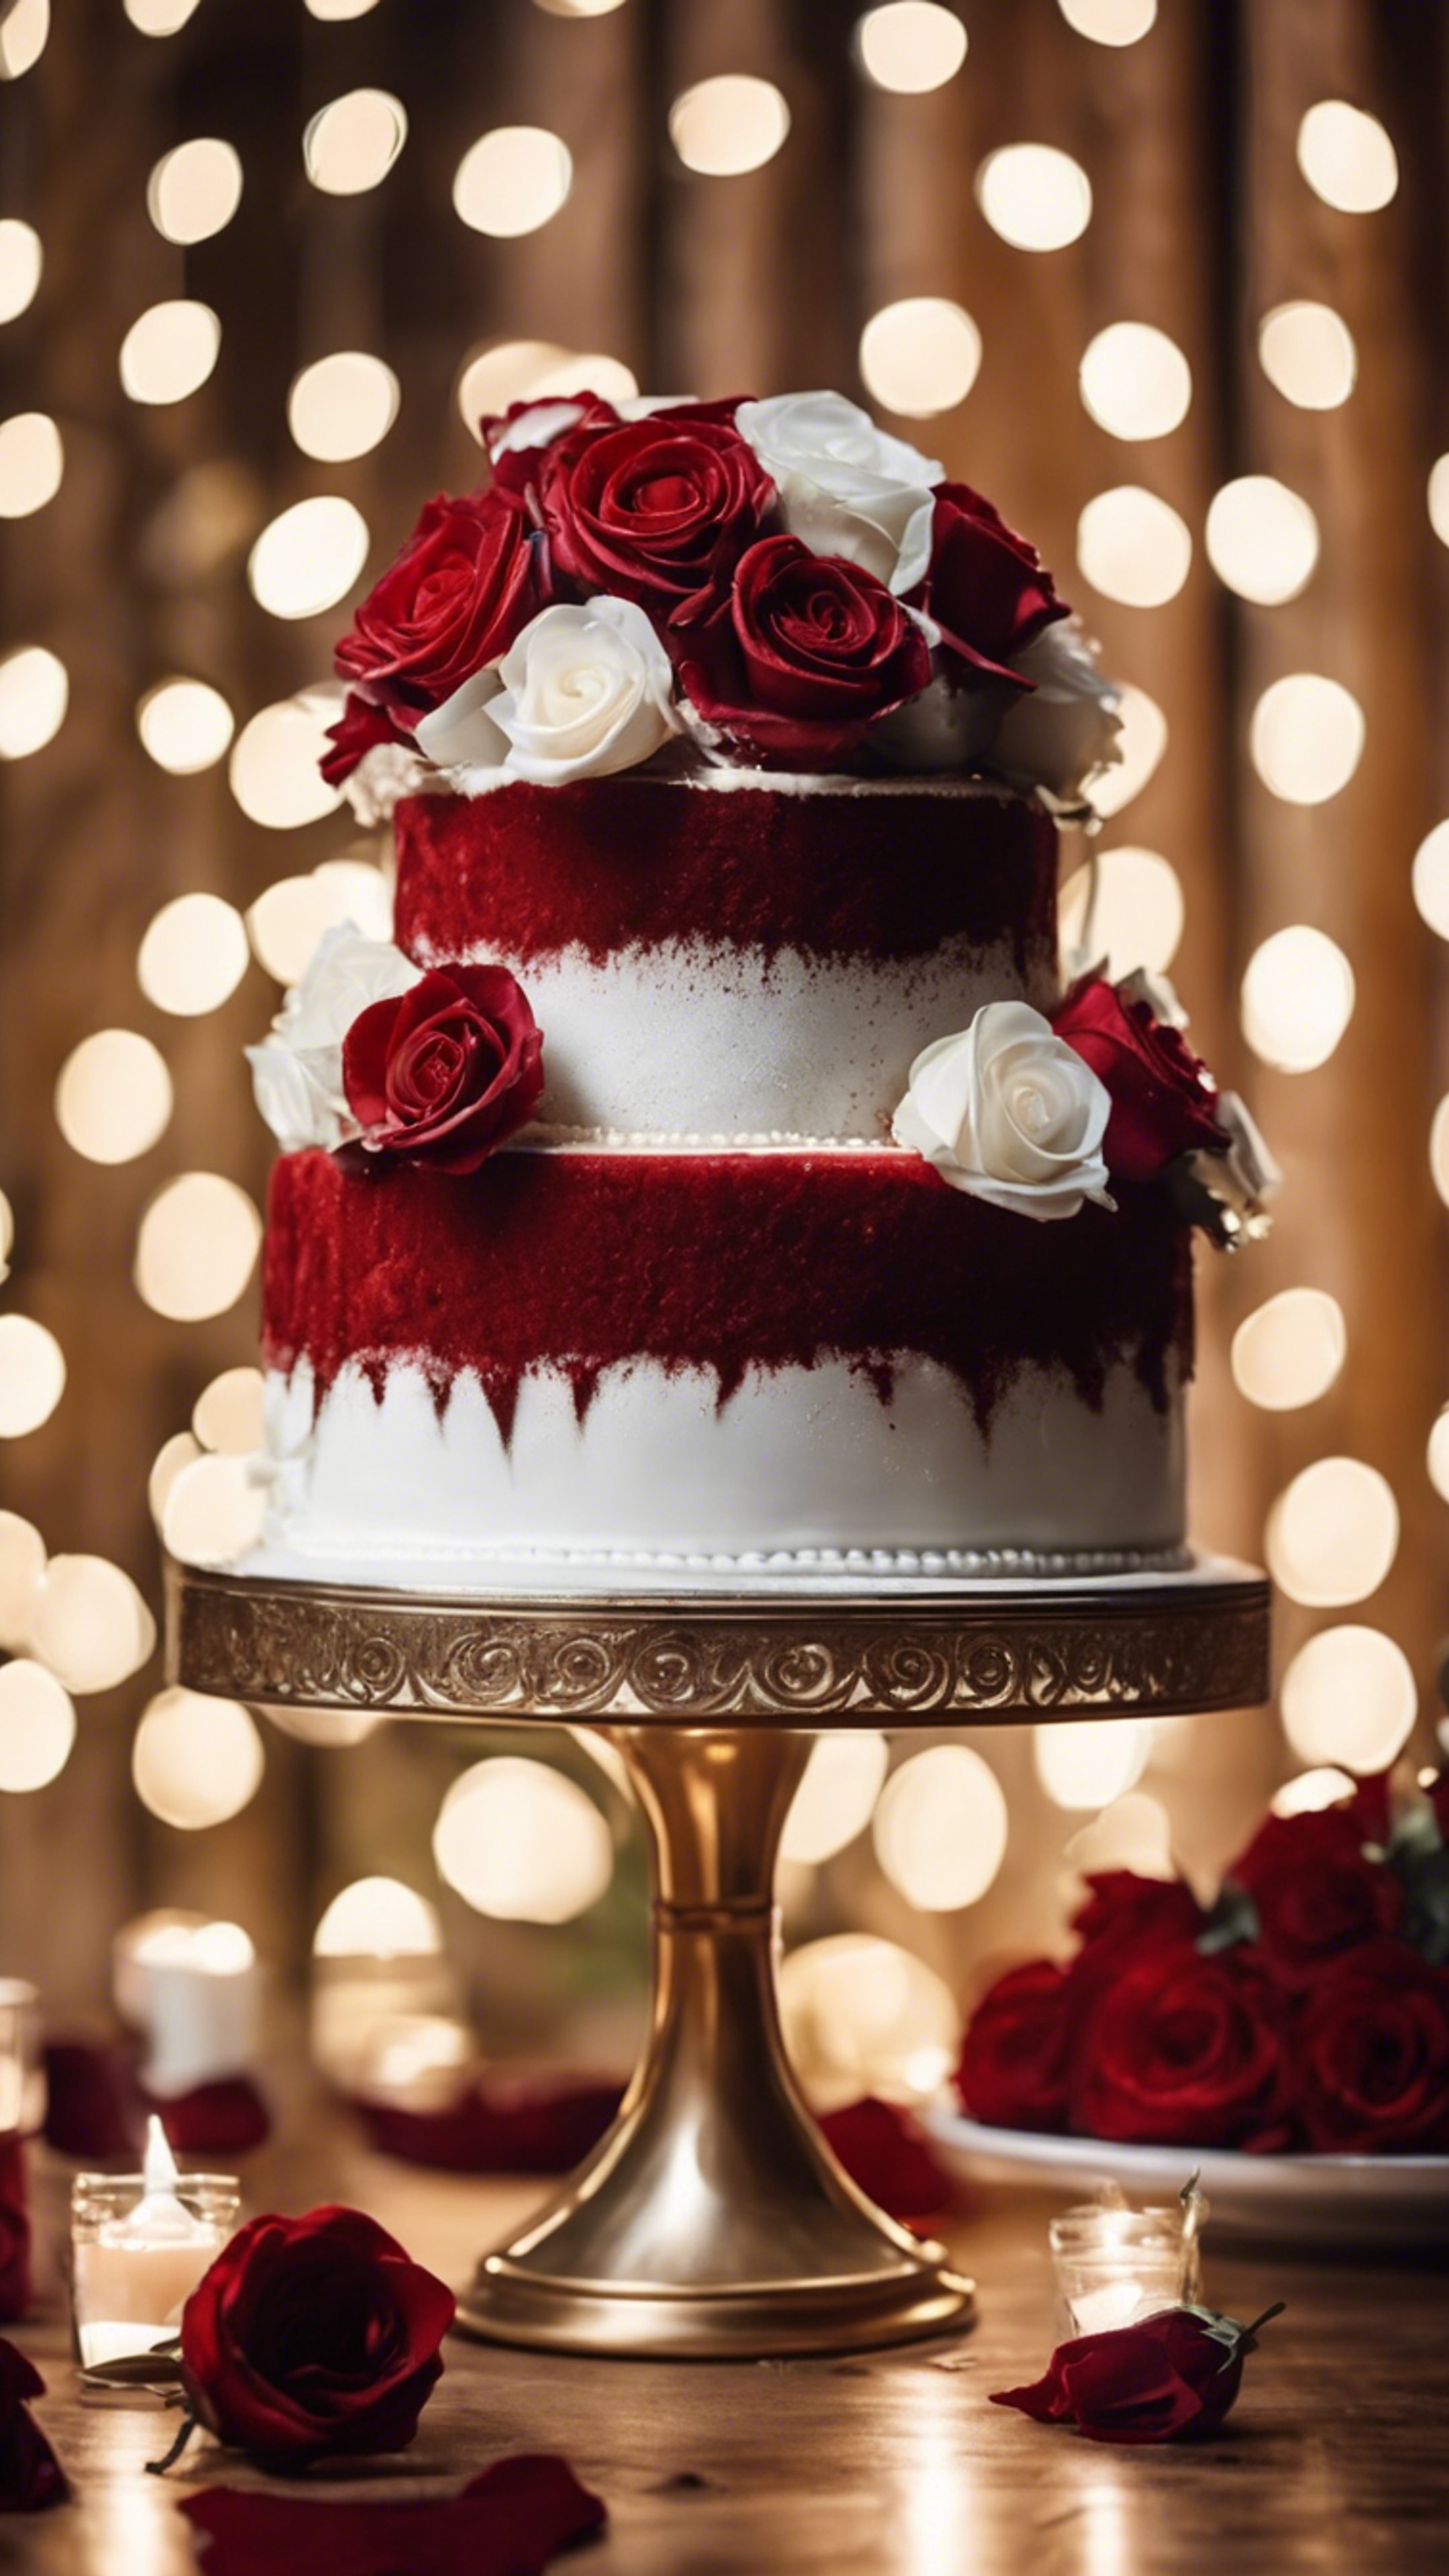 Three-tiered red velvet wedding cake adorned with white roses, against a backdrop of twinkling fairy lights.壁紙[b48557e9e8f84a90b888]